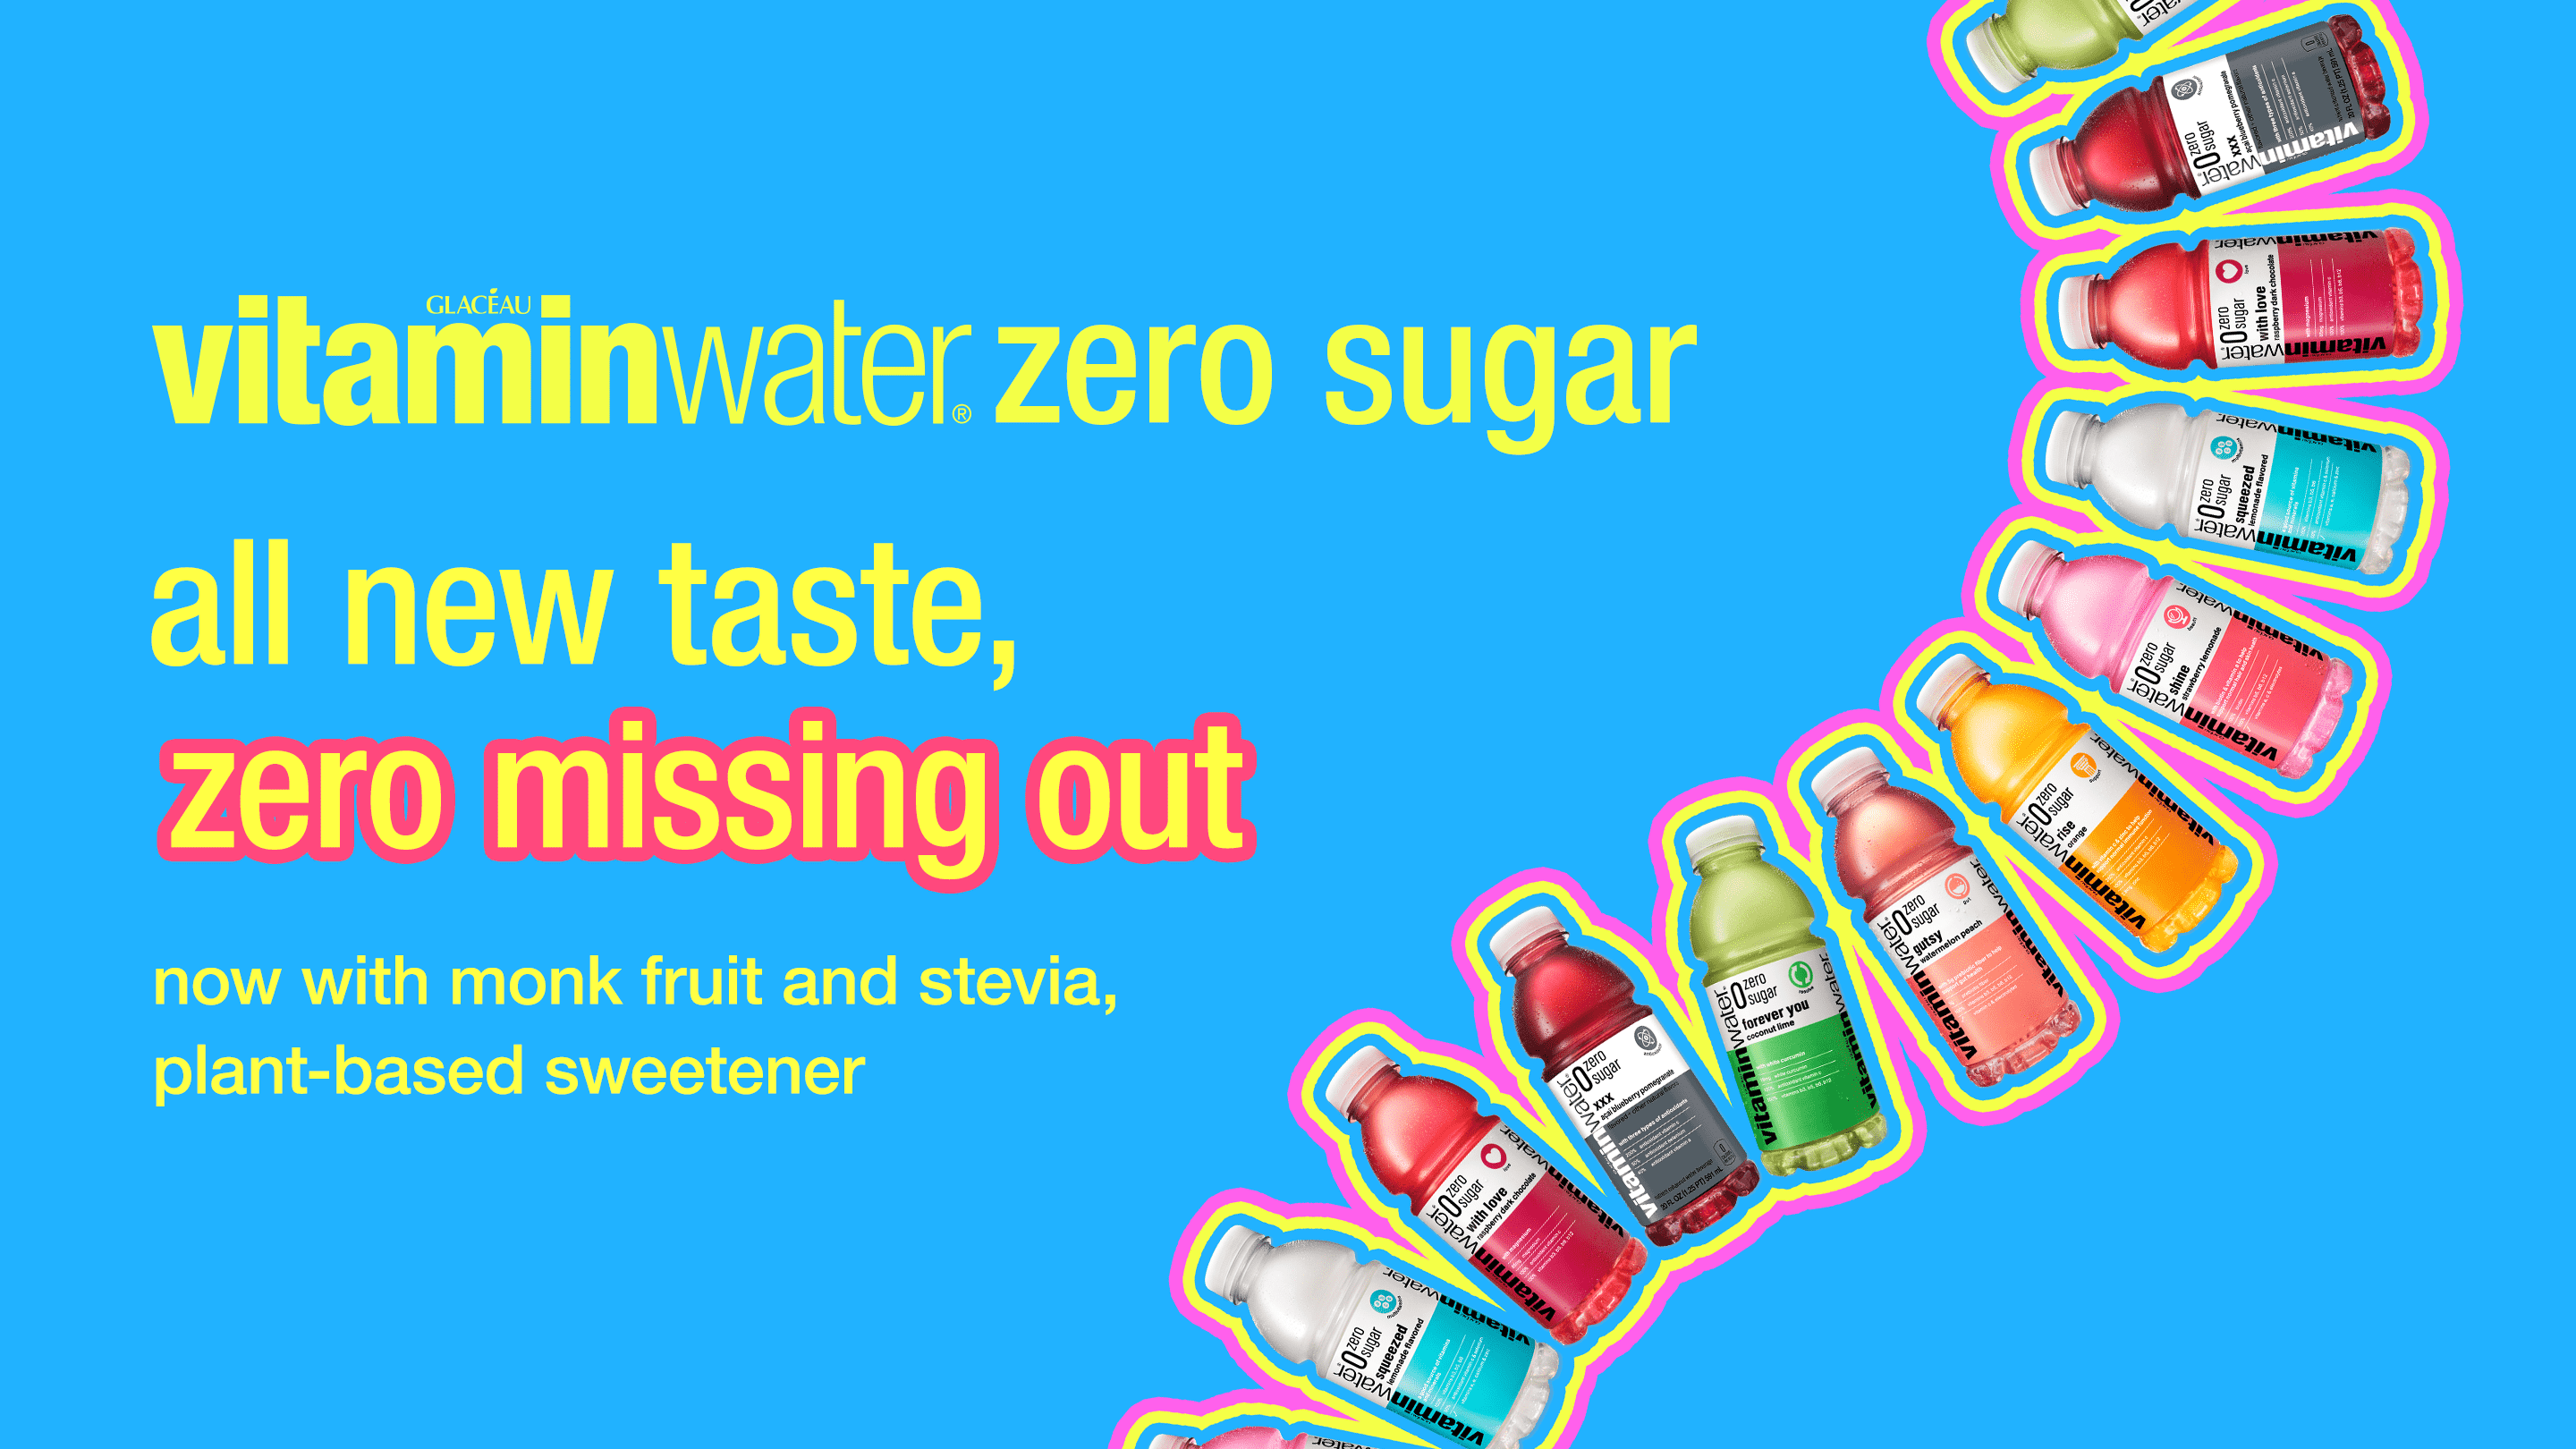 VitaminWater Zero, all new taste, zero missing out. now with monk fruit and stevia, plant-based sweetener